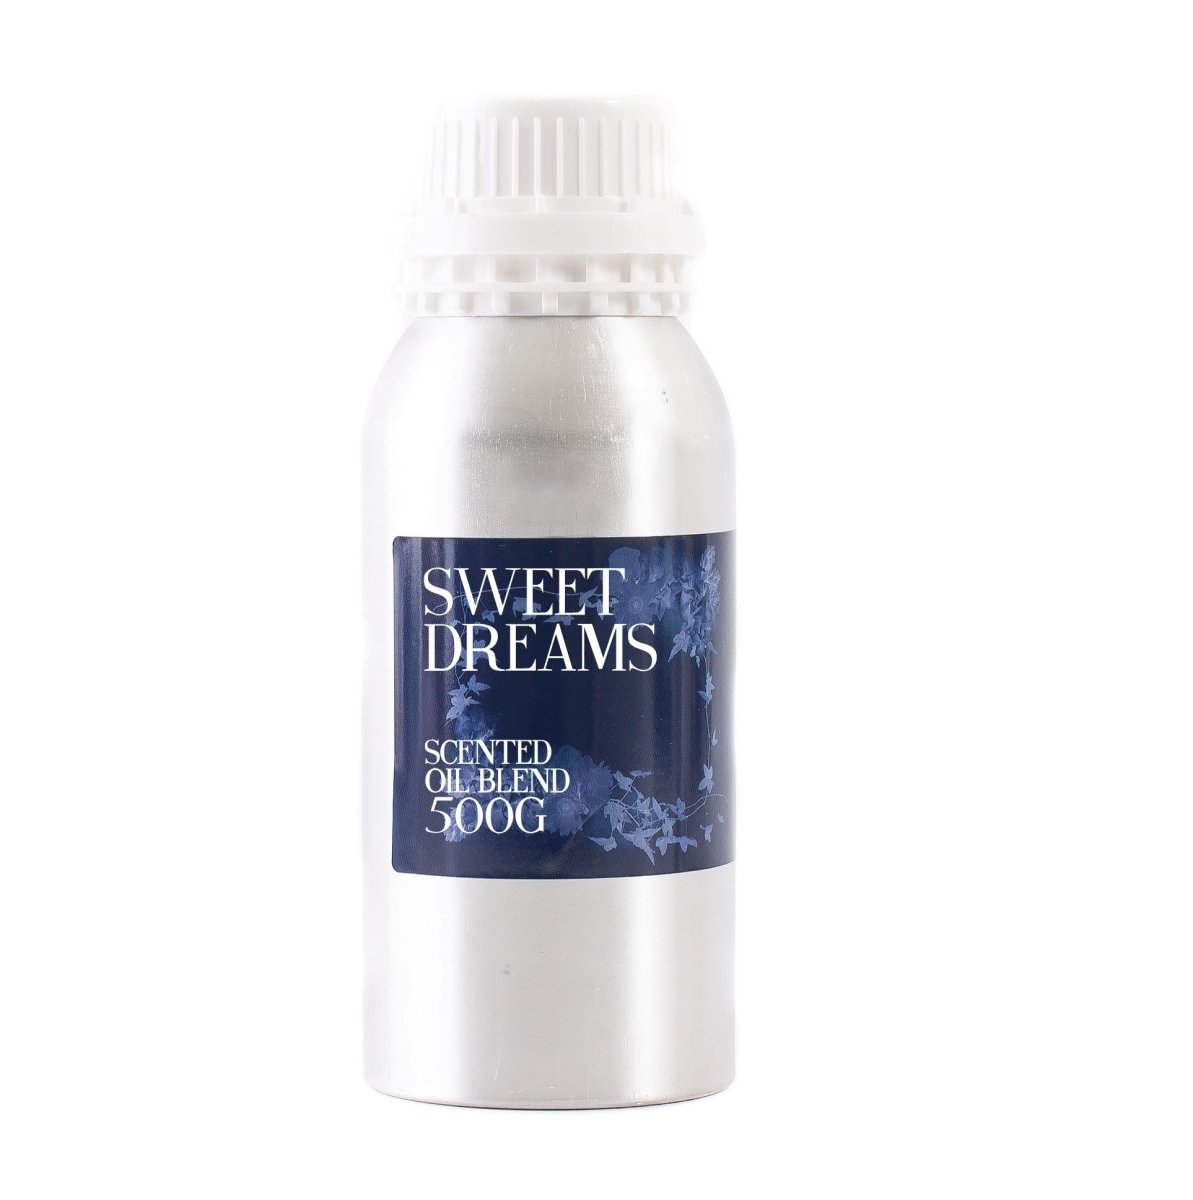 Sweet Dreams - Scented Oil Blend - Mystic Moments UK